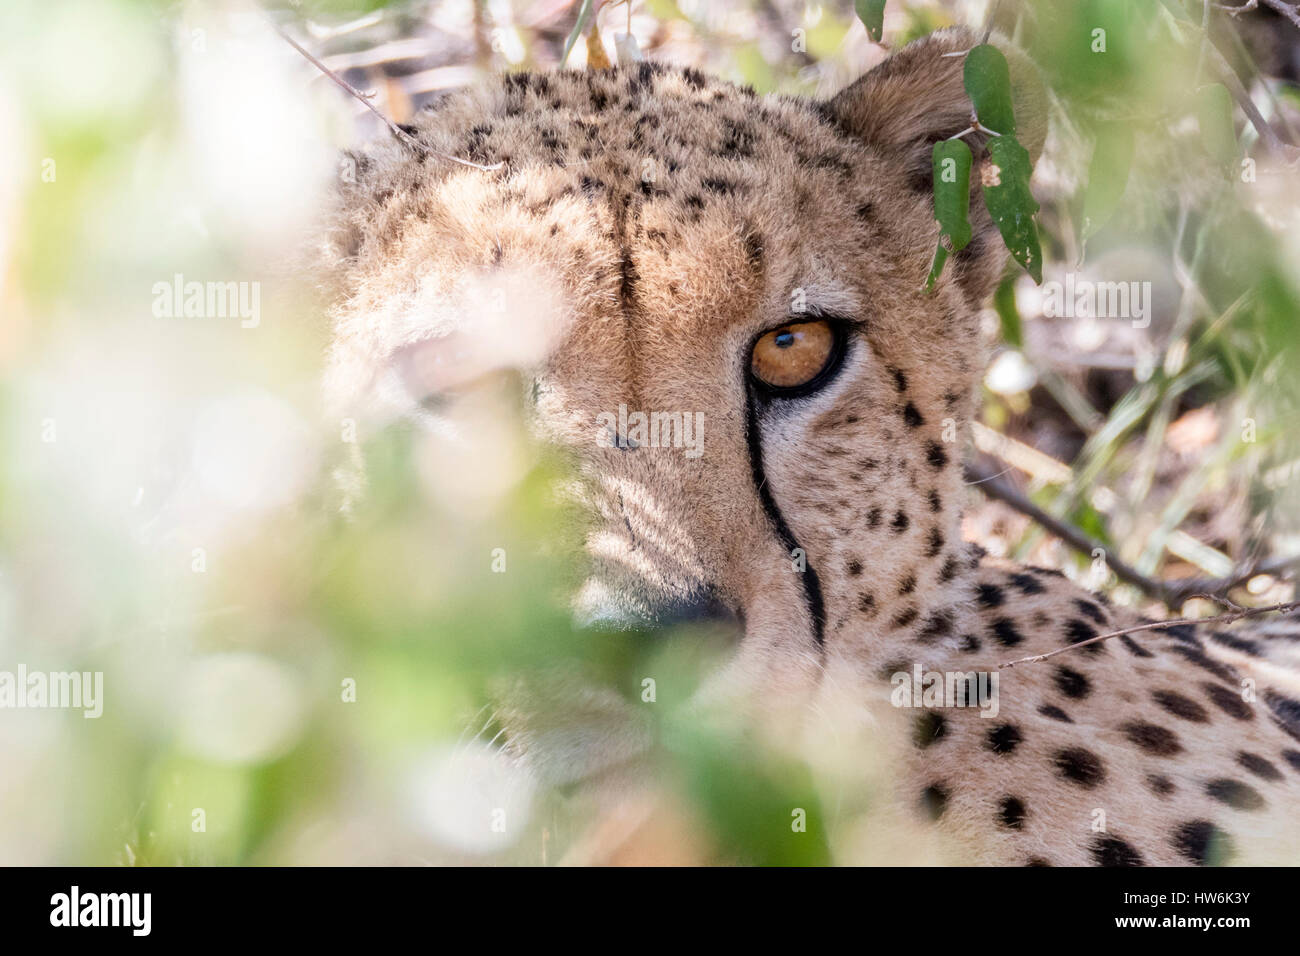 Cheetah hiding and looking to the camera Stock Photo